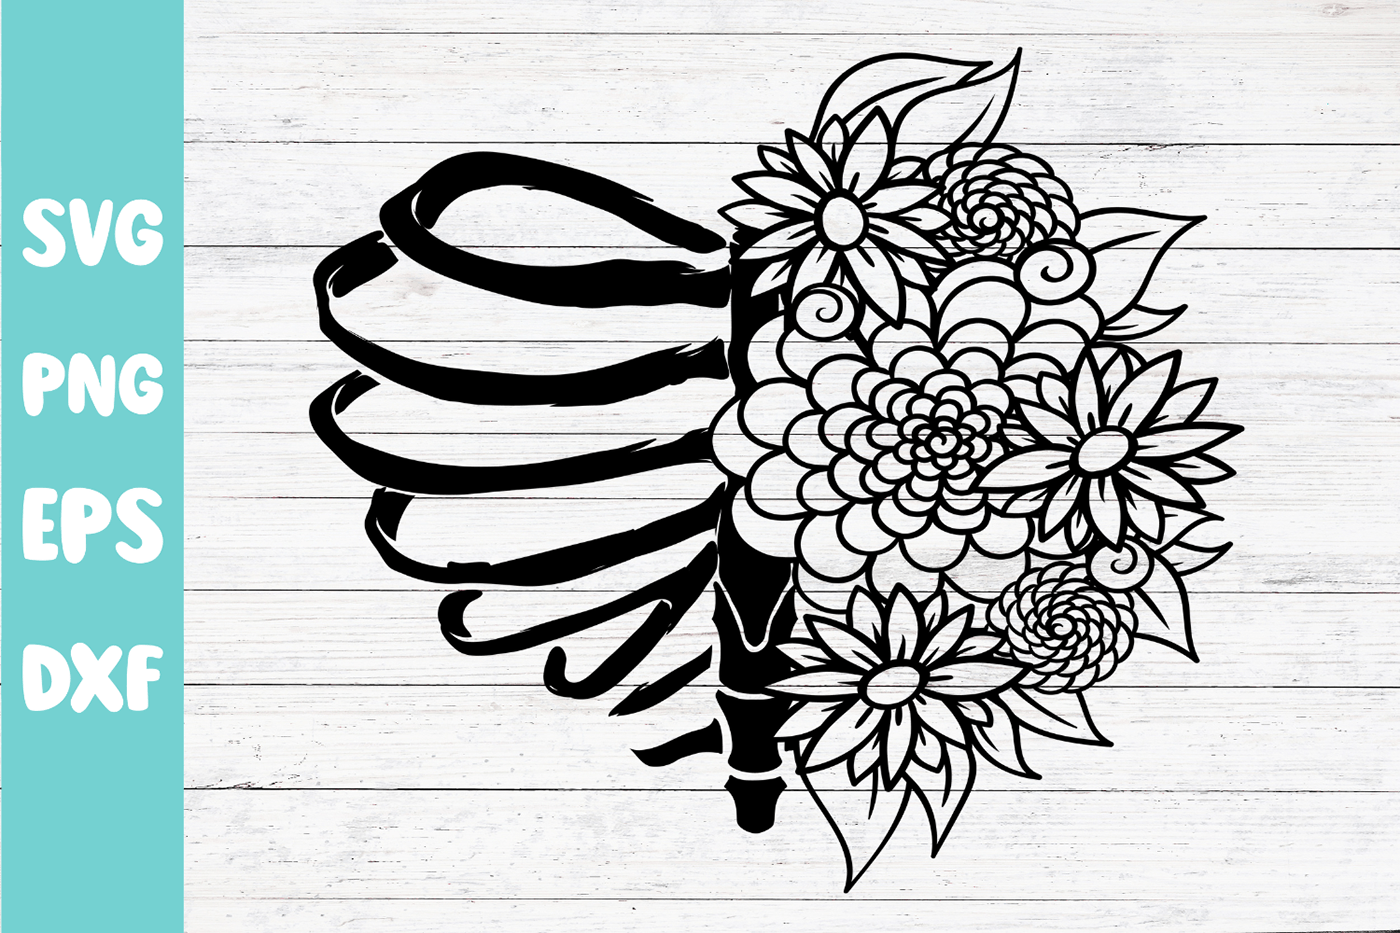 Rib Cage Floral Svg, Ribcage Flowers svg, Skeleton Flower Svg, ribs svg, Skeleton Ribs floral svg, 